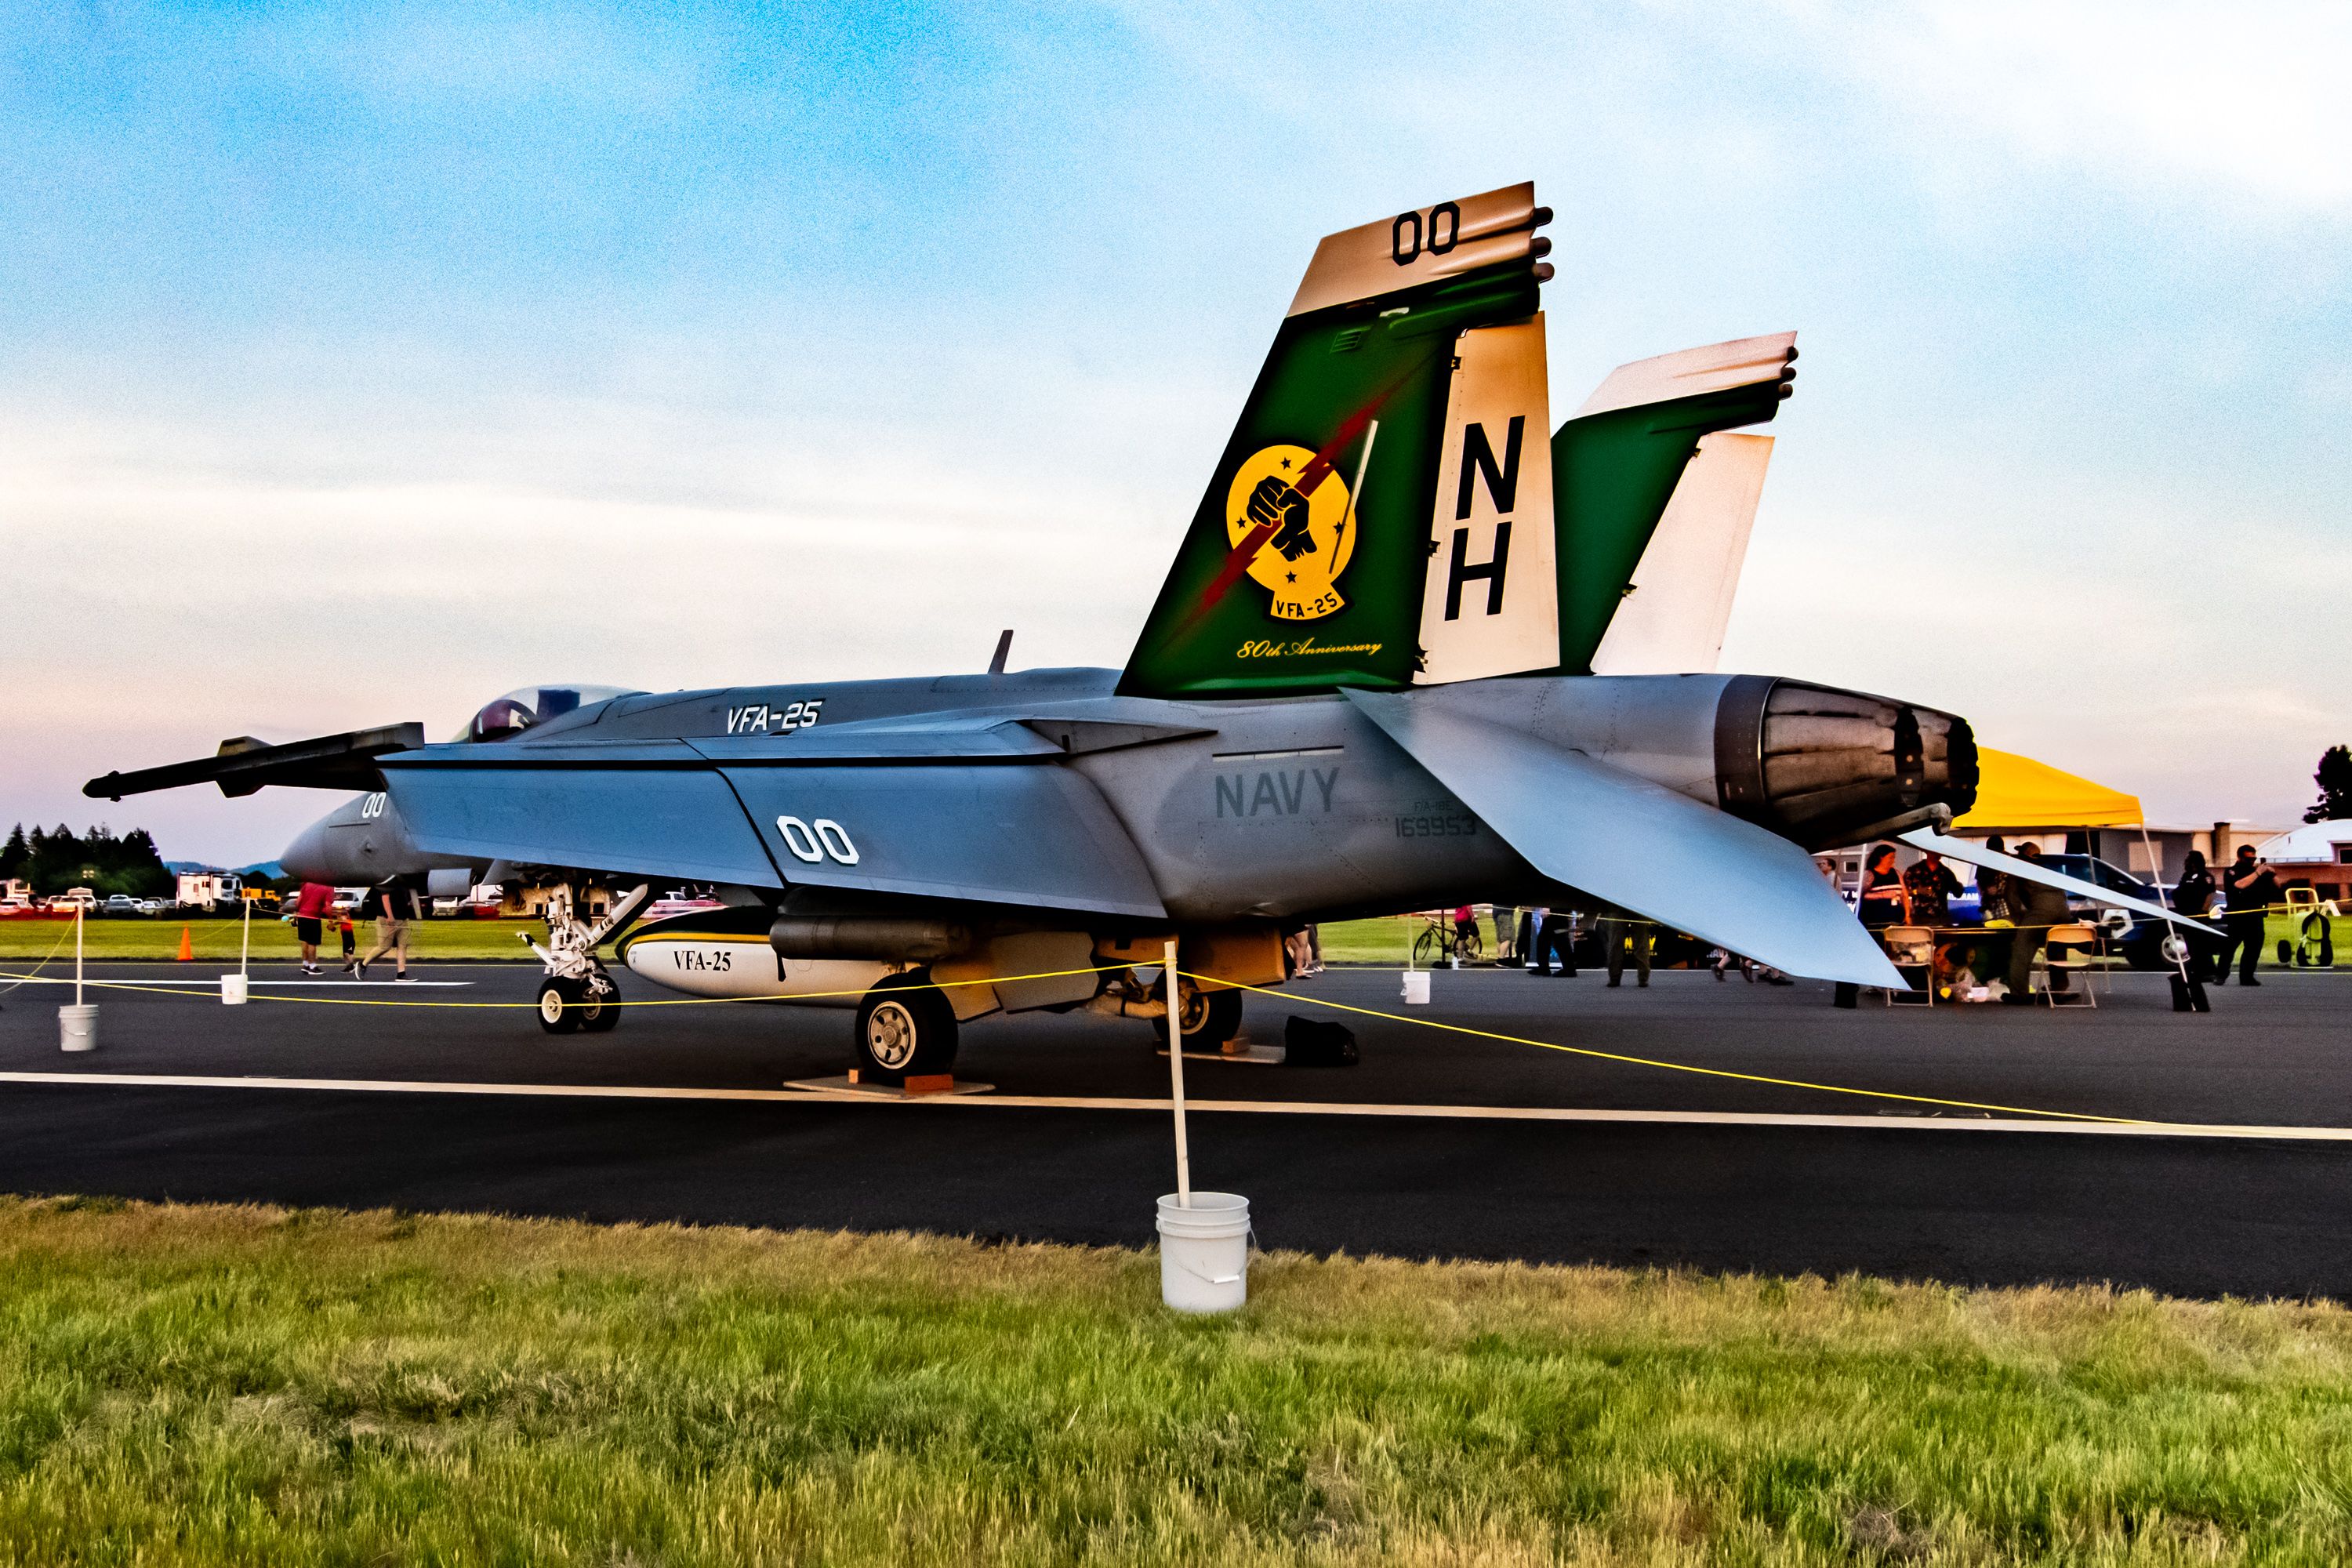 A US Navy Boeing F/A-18E Super Hornet on display at an air show.